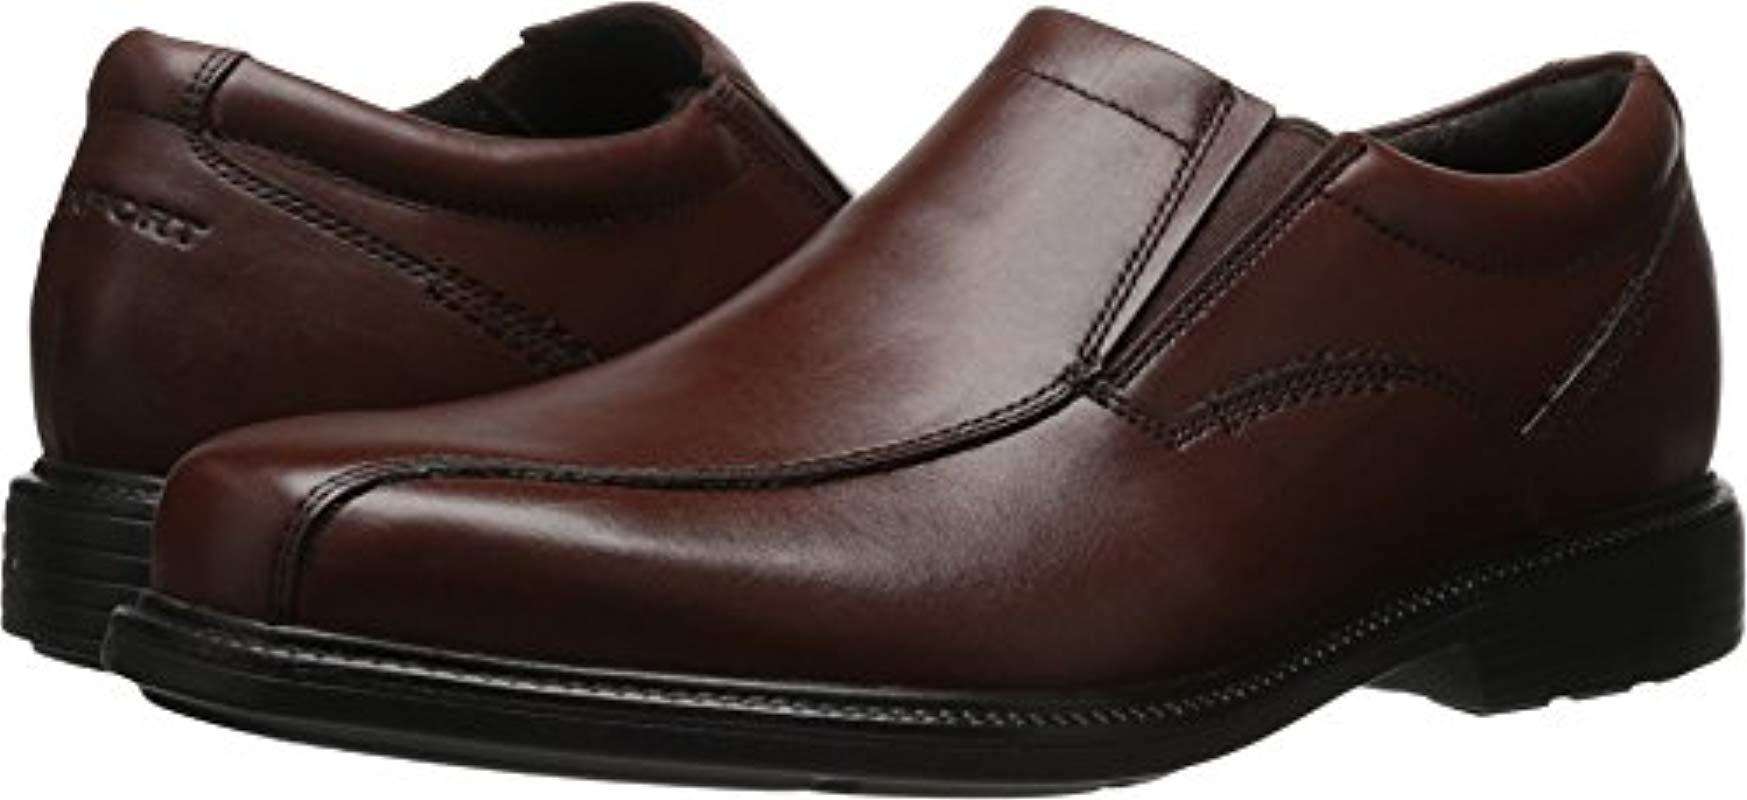 rockport penny loafers amazon